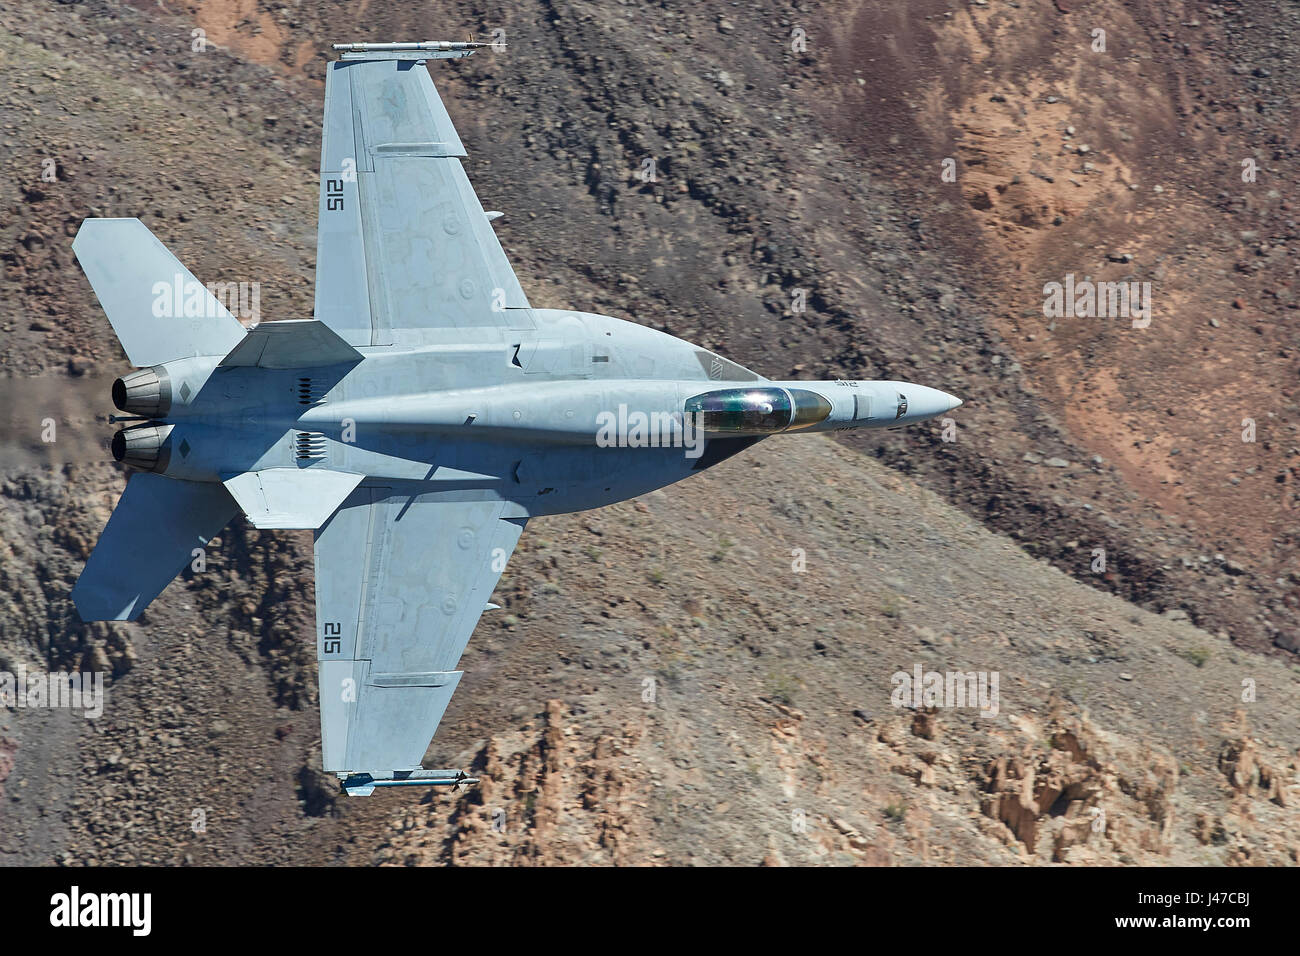 United States Navy F/A-18E, Super Hornet, Flying At High Speed And Low Level Through A Desert Canyon. Stock Photo